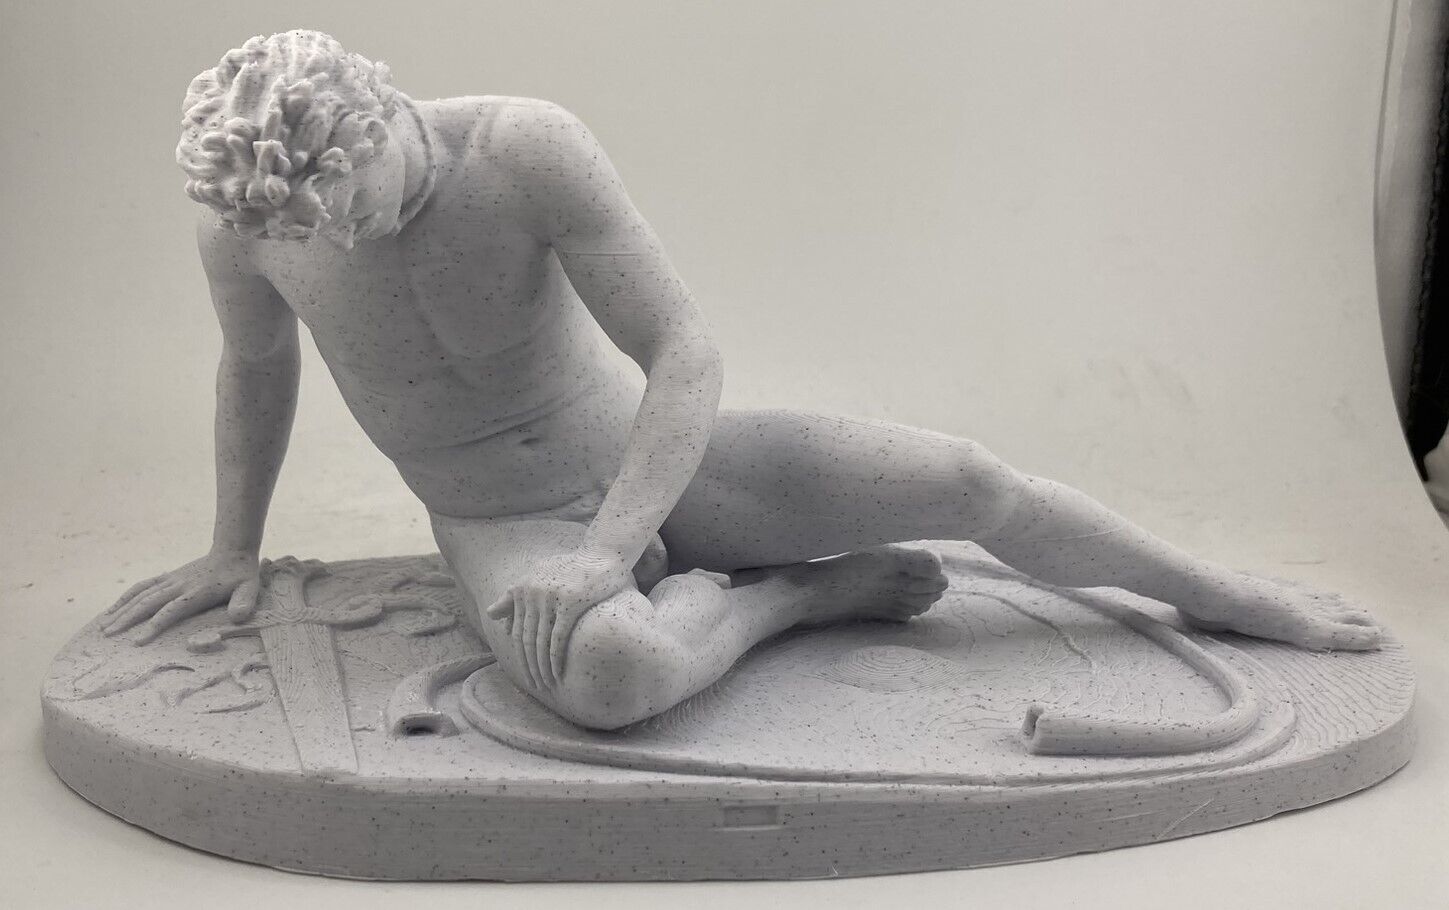 GREEK SCULPTURE DYING GAUL 9.8 INCH/250 MM IN WIDTH, MUSEUM REPRODUCTION